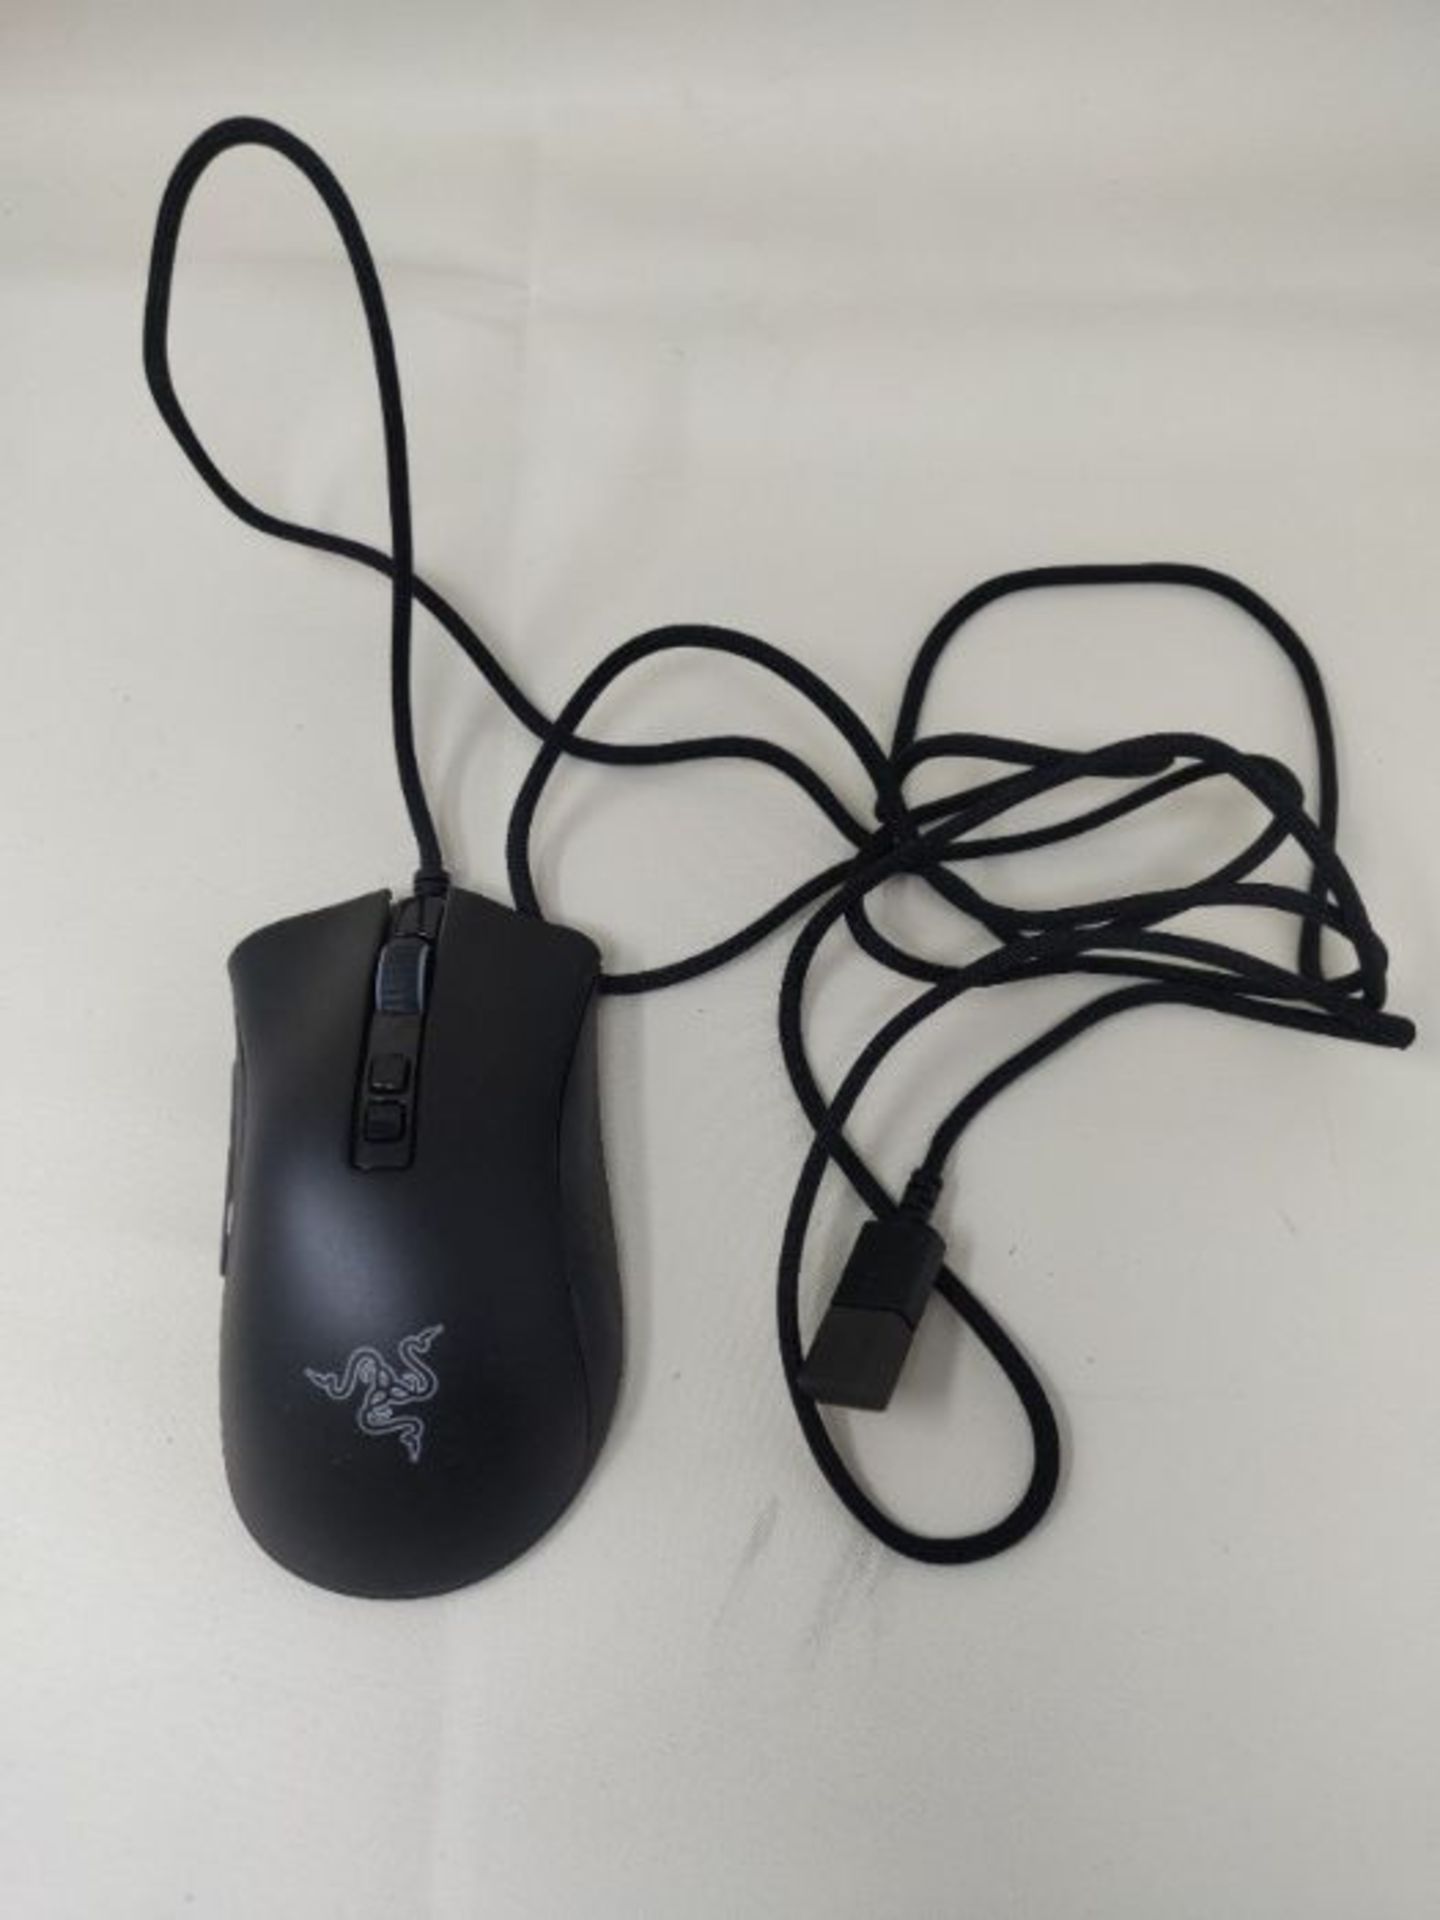 Razer DeathAdder V2 - Wired USB Gaming Mouse with Optical Mouse Switches - Bild 2 aus 2